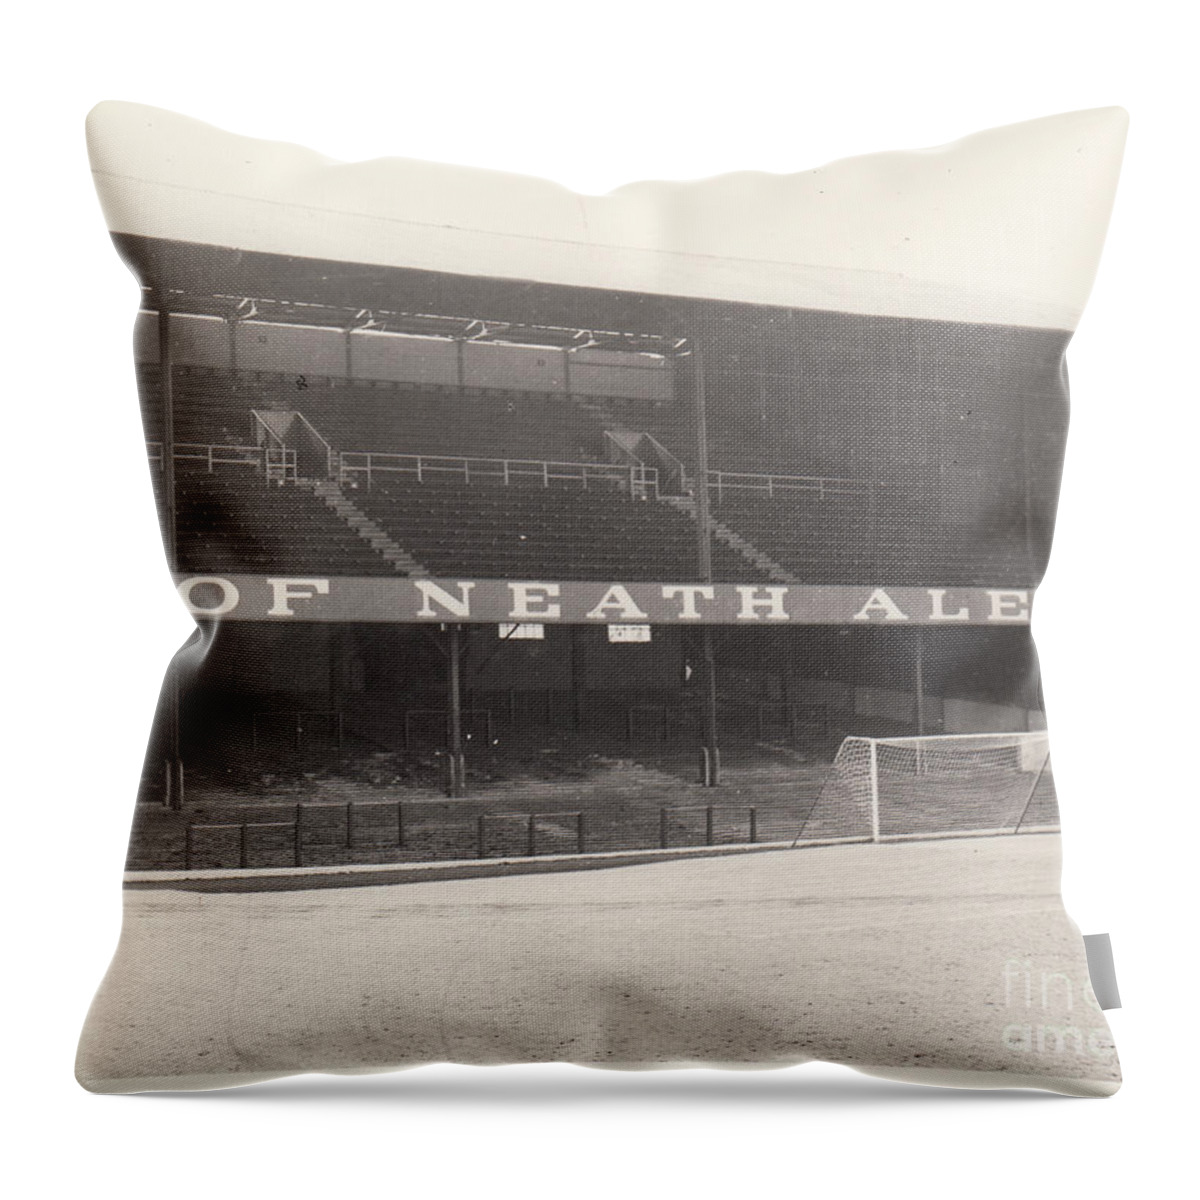  Throw Pillow featuring the photograph Swansea - Vetch Field - West Terrace 1 - BW - 1960s by Legendary Football Grounds